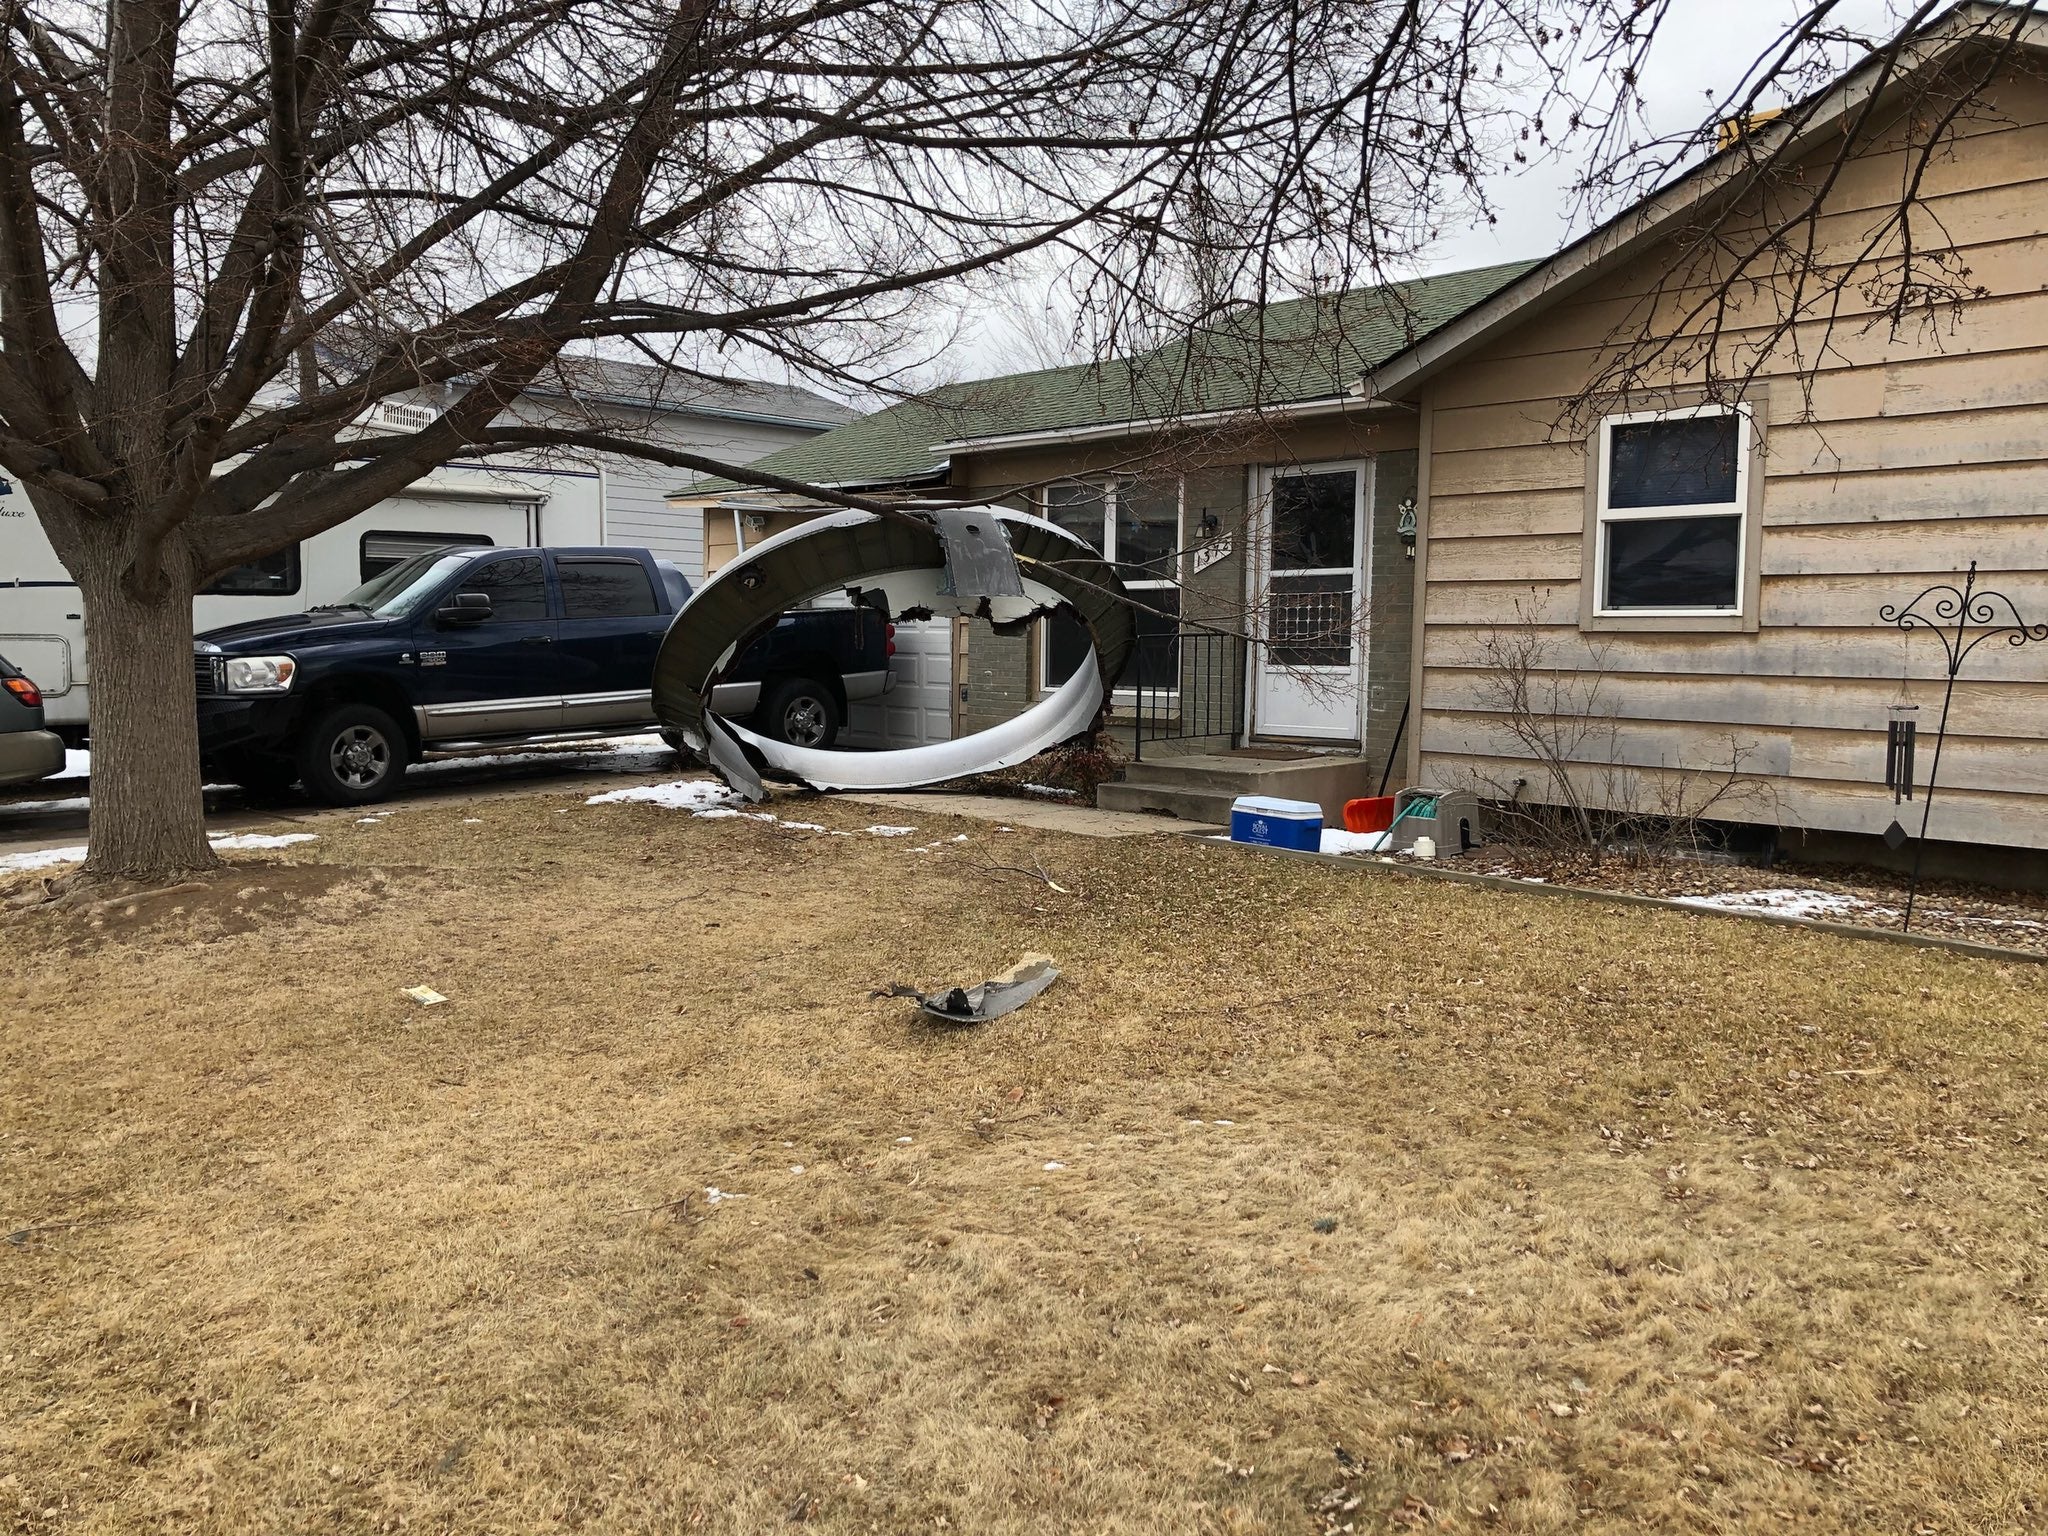 Residents of Broomfield, Colorado, reported plane debris in their yard after an airplane experienced engine difficulties